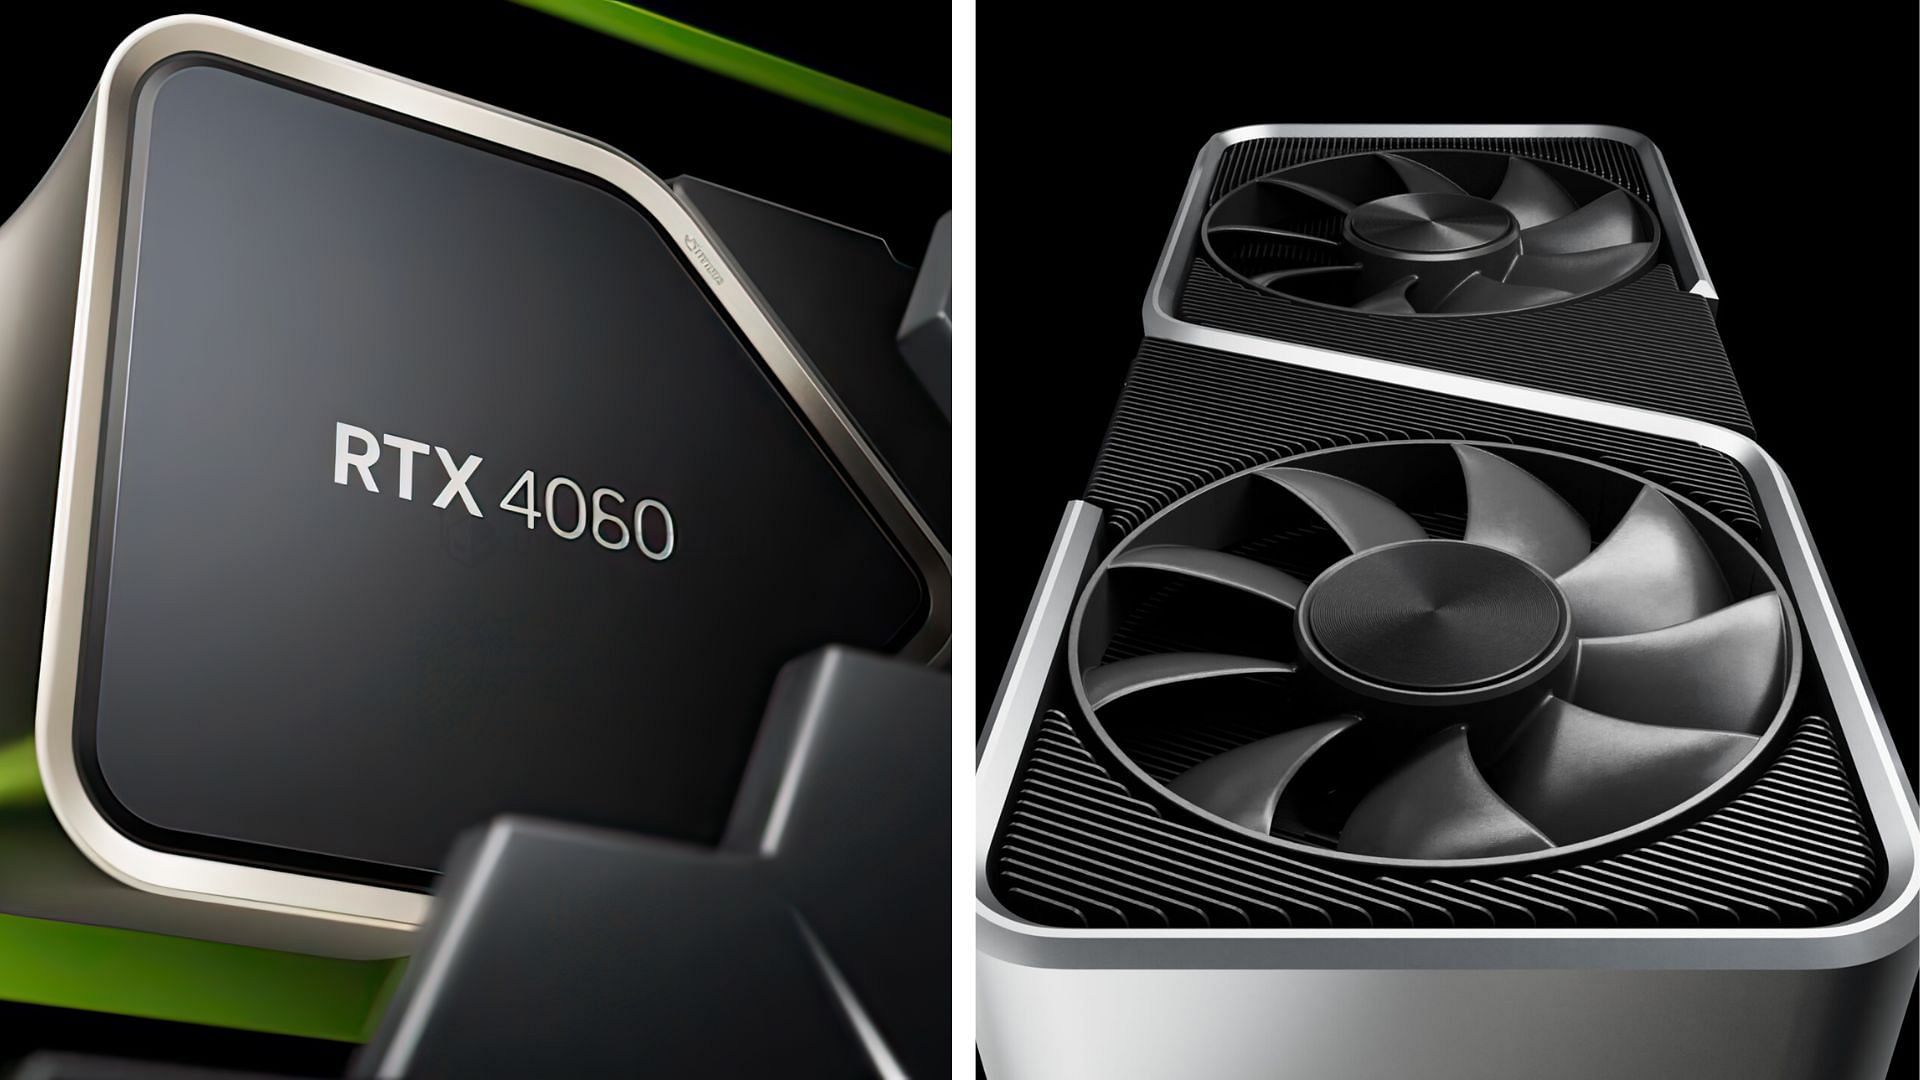 The Geforce RTX 4060 and RTX 3060 Ti are budget graphics cards for 1080p gaming (Image via Nvidia)